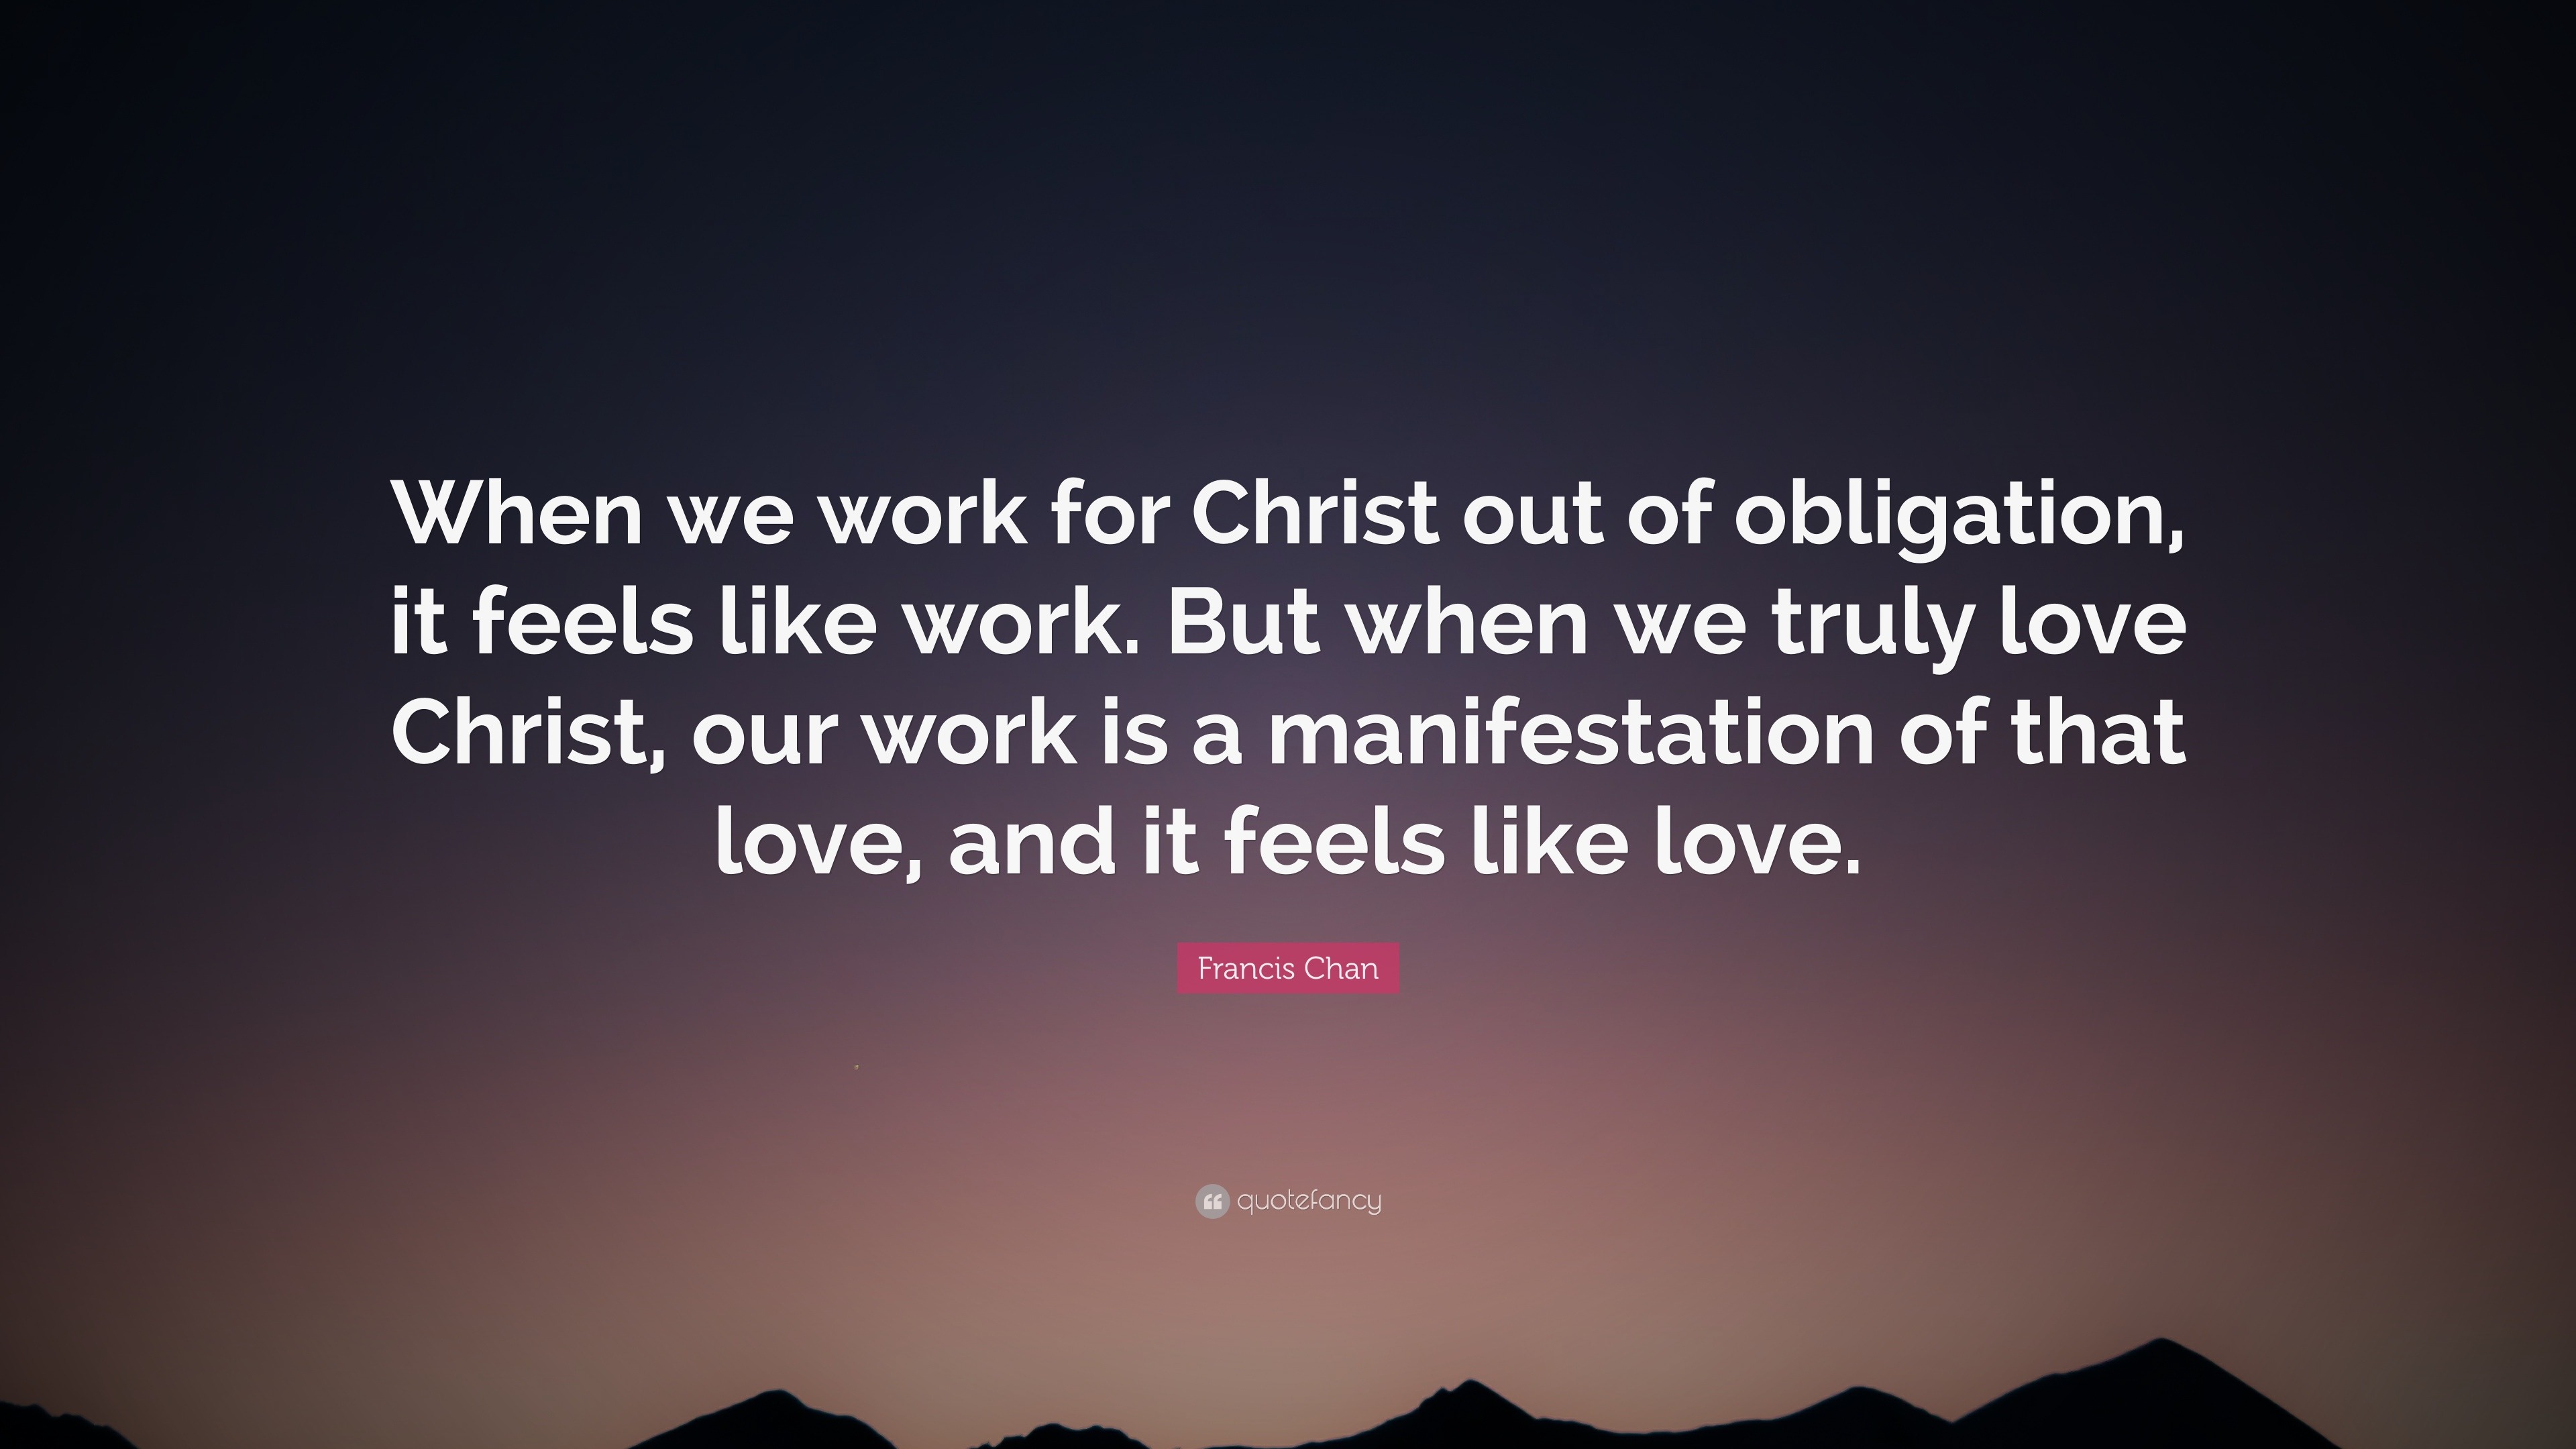 Francis Chan Quote “When we work for Christ out of obligation it feels